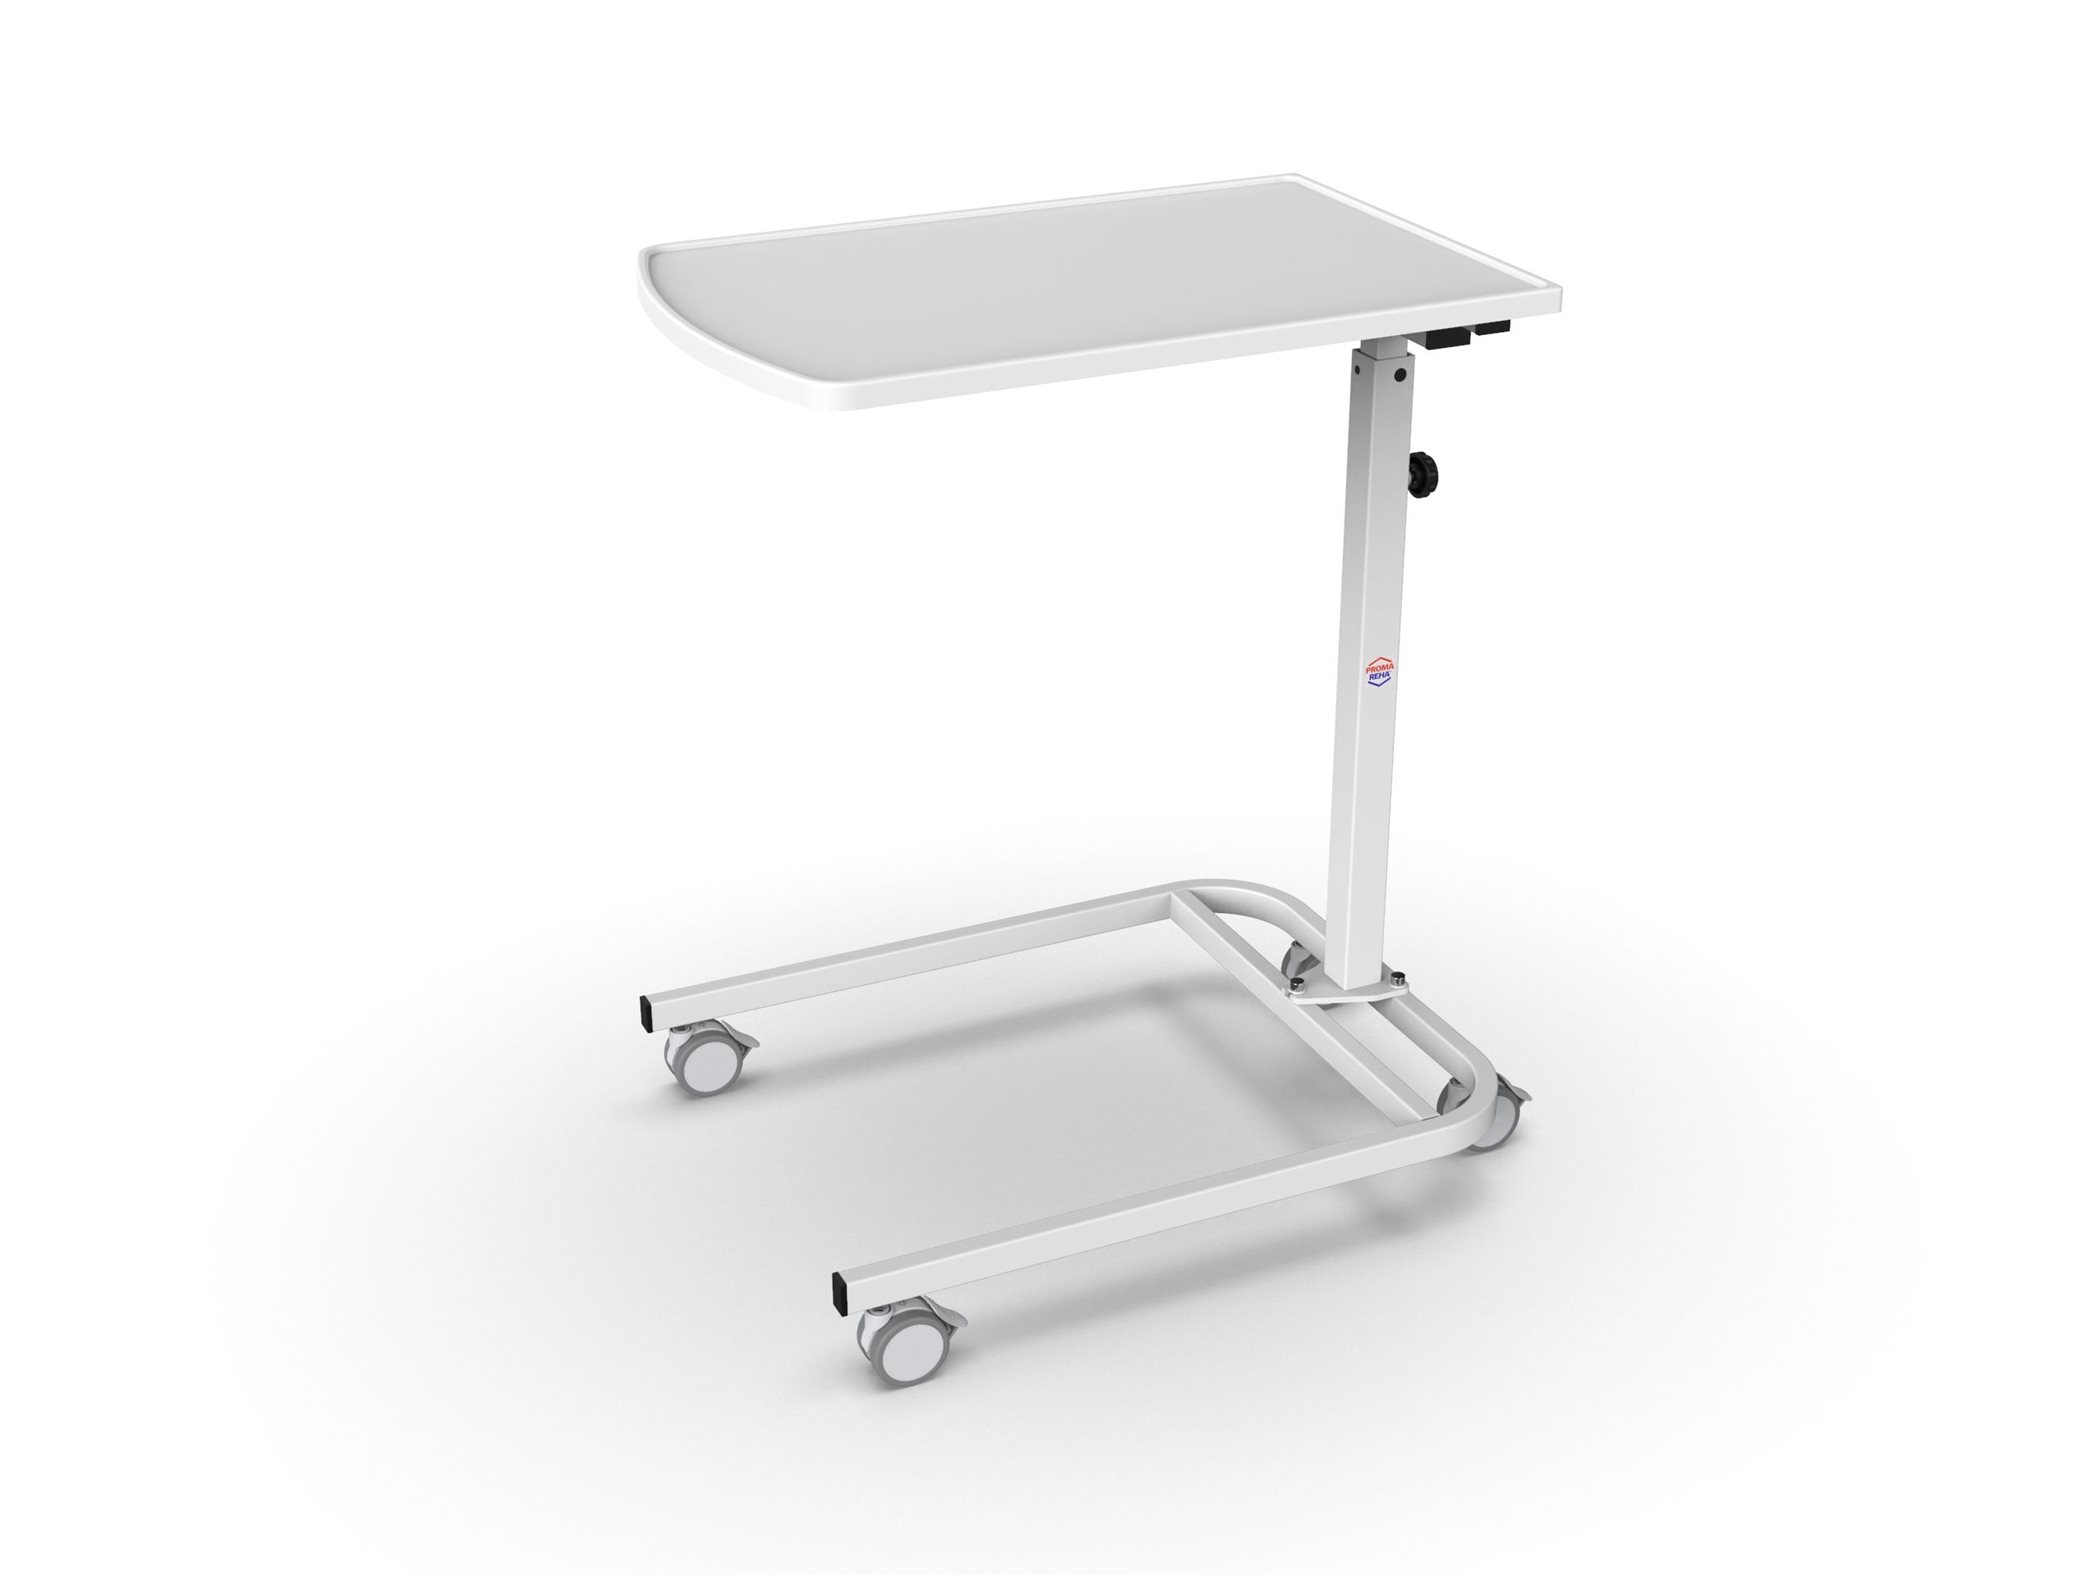 Serving table S-202-B